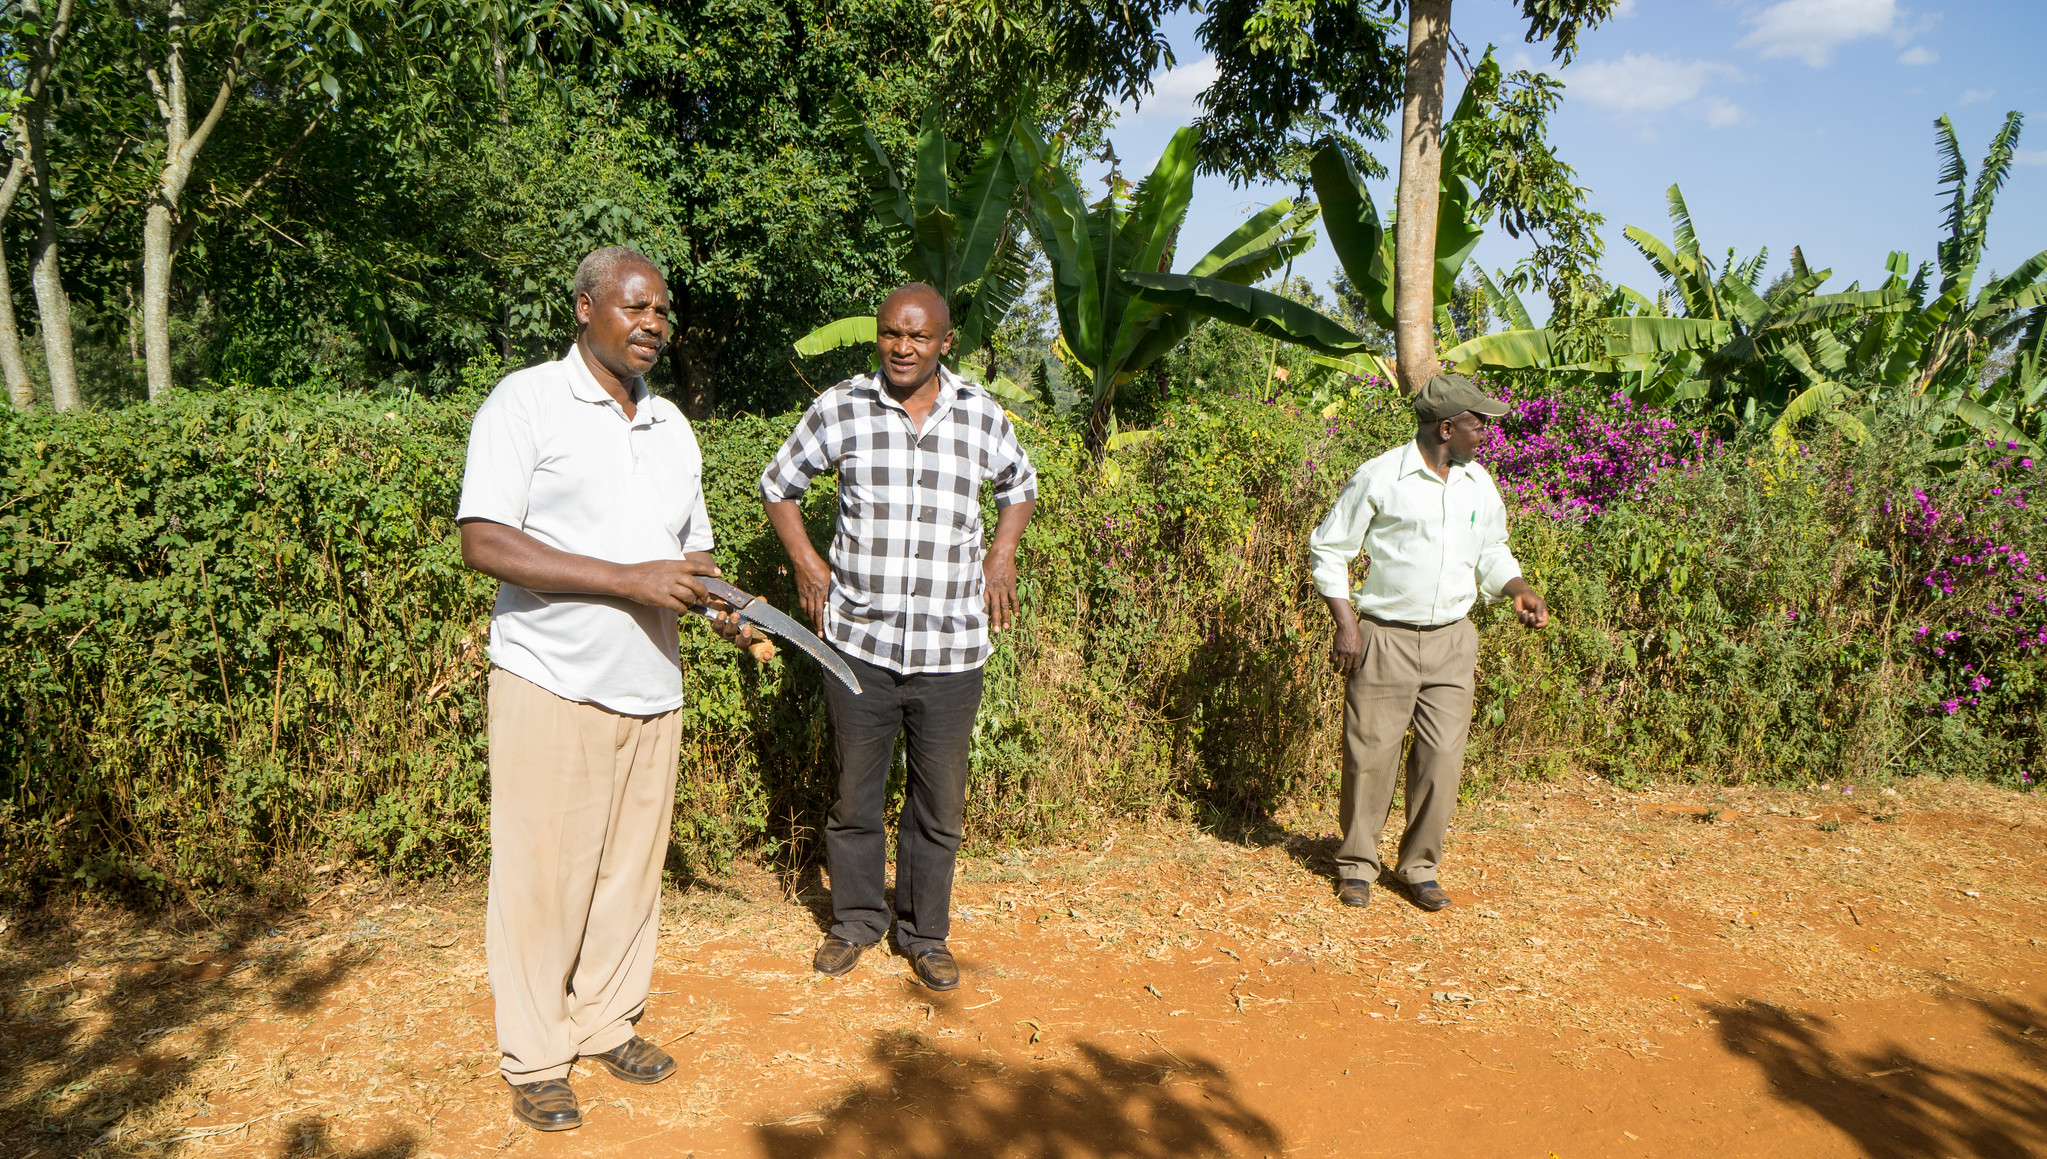 Kieni farmer Joseph Ngari to the left, factory manager Jospath in the middle and chairman Charles to the right.